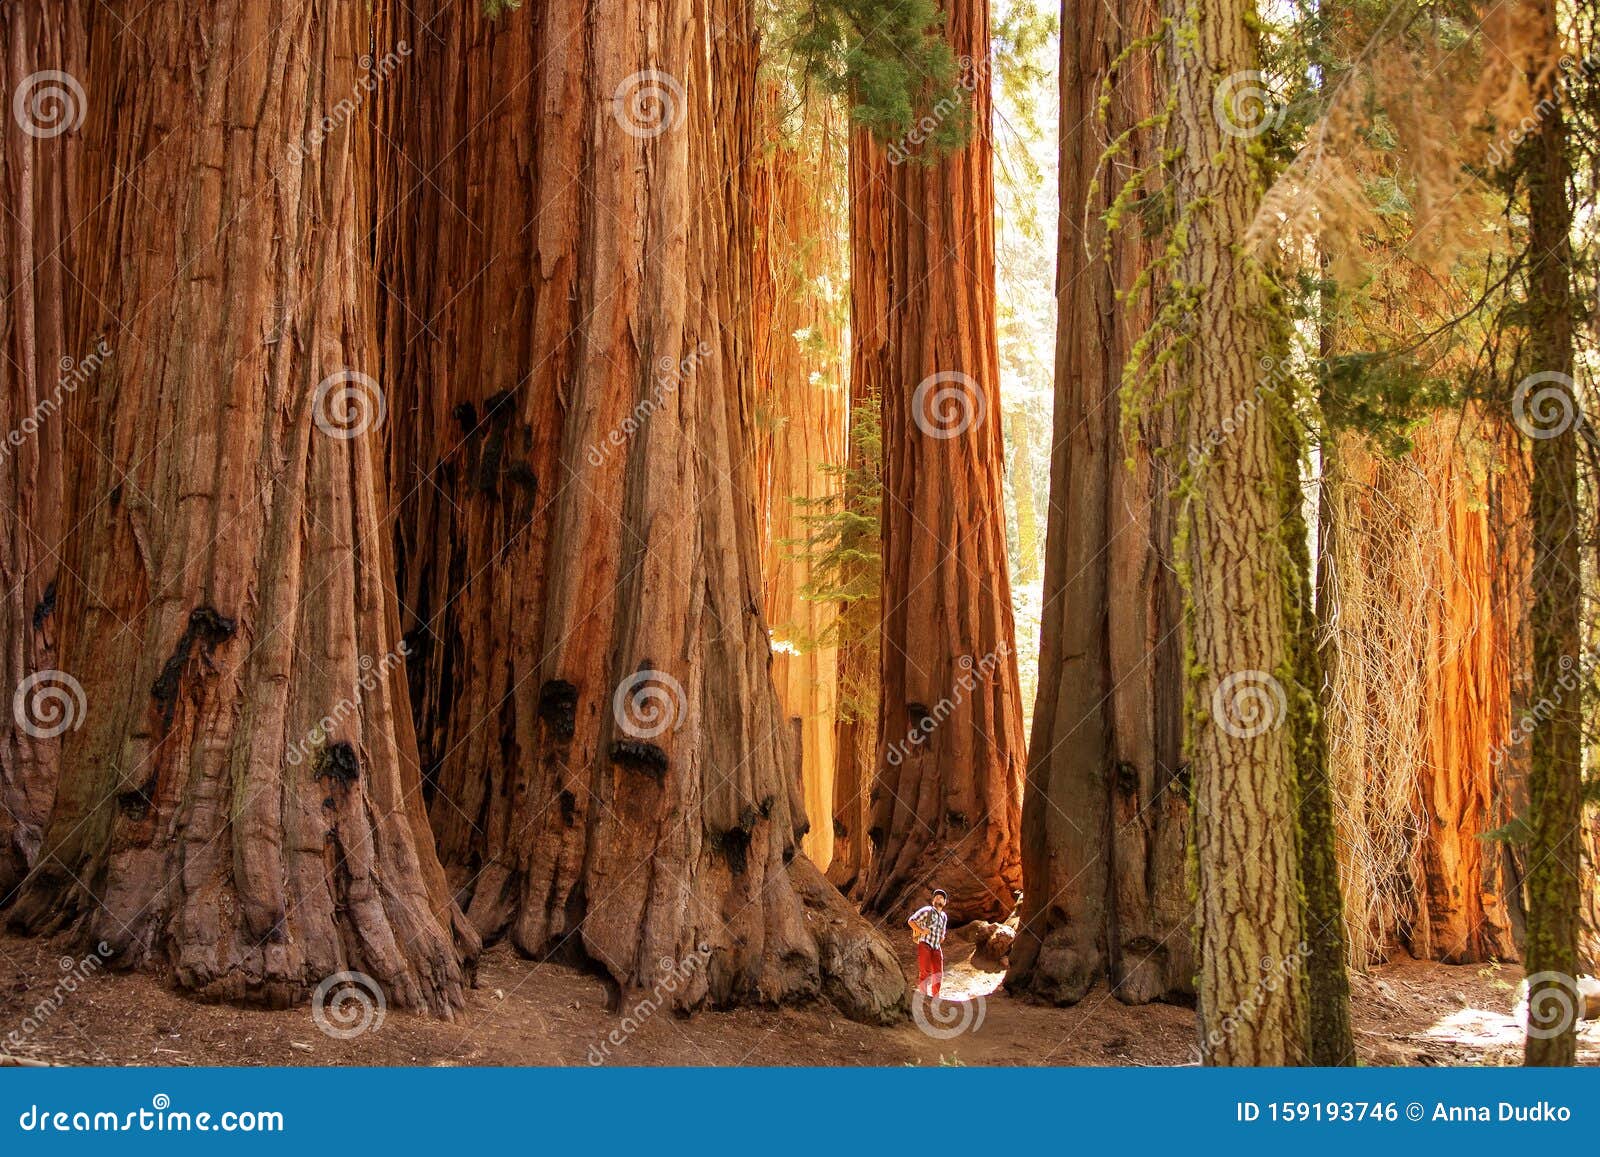 hiker in sequoia national park in california, usa